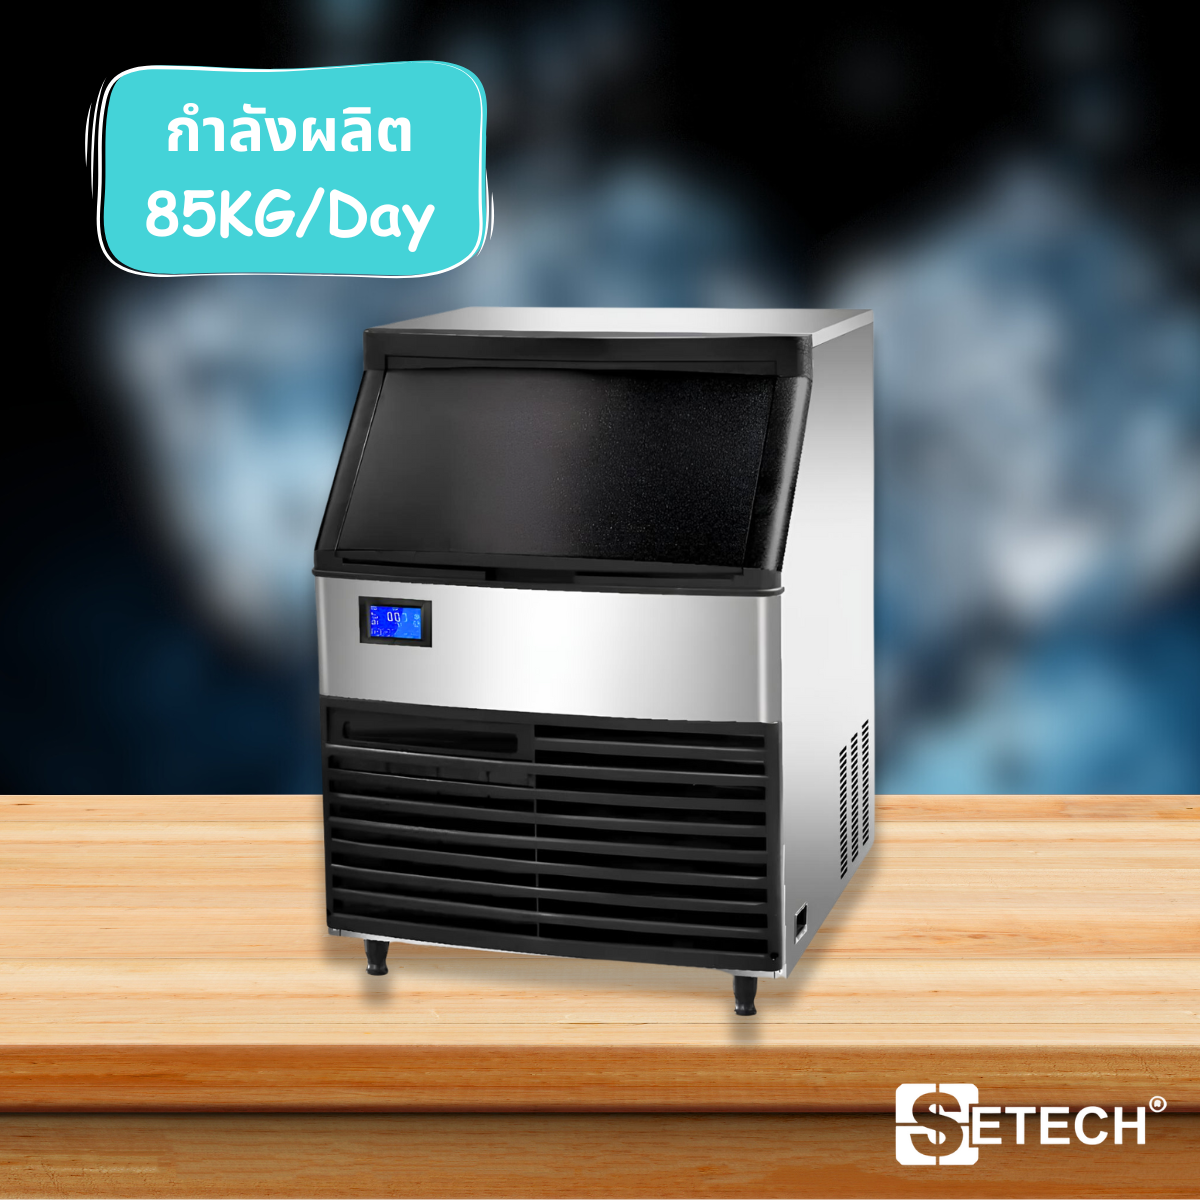 Ice maker 580w Setech production capacity 85KG per day IC-05